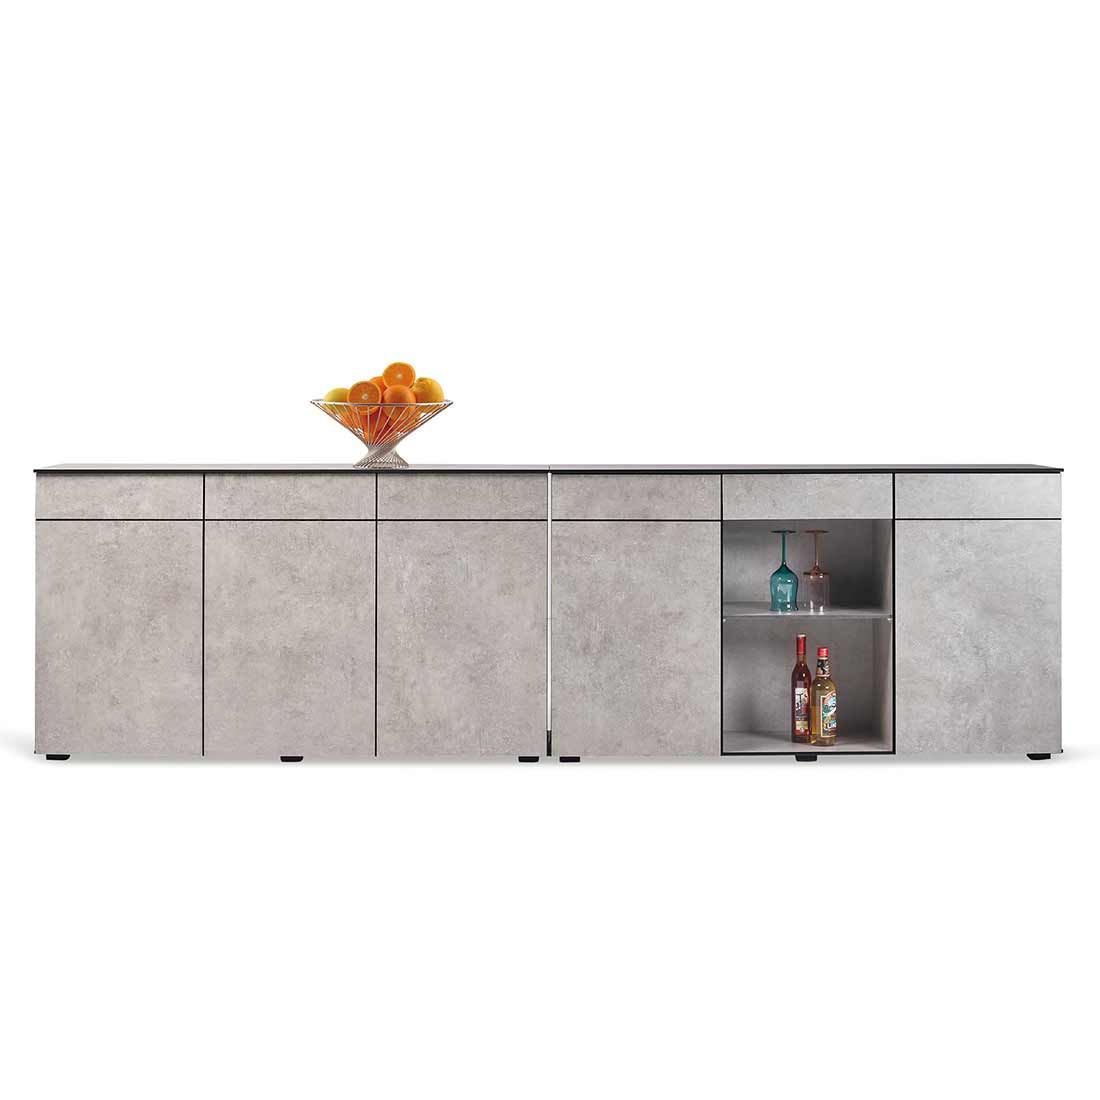 Best Beyond Need a Hand Sideboard 102x46x88cm